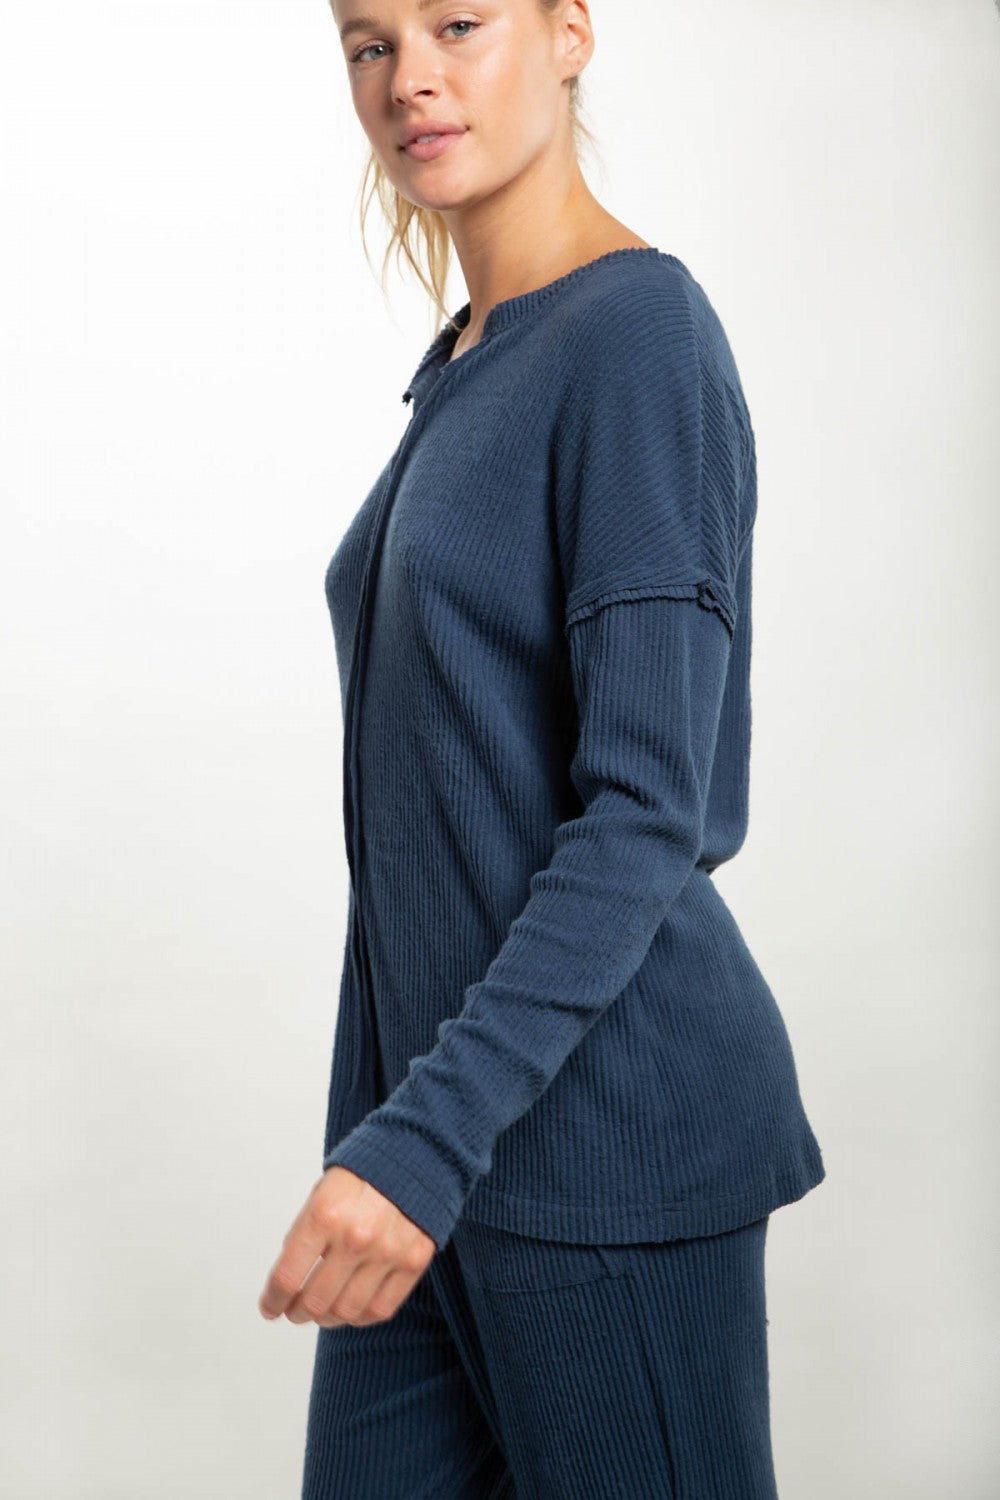 Ribbed Chill Lounge Pullover with Notched Neckline